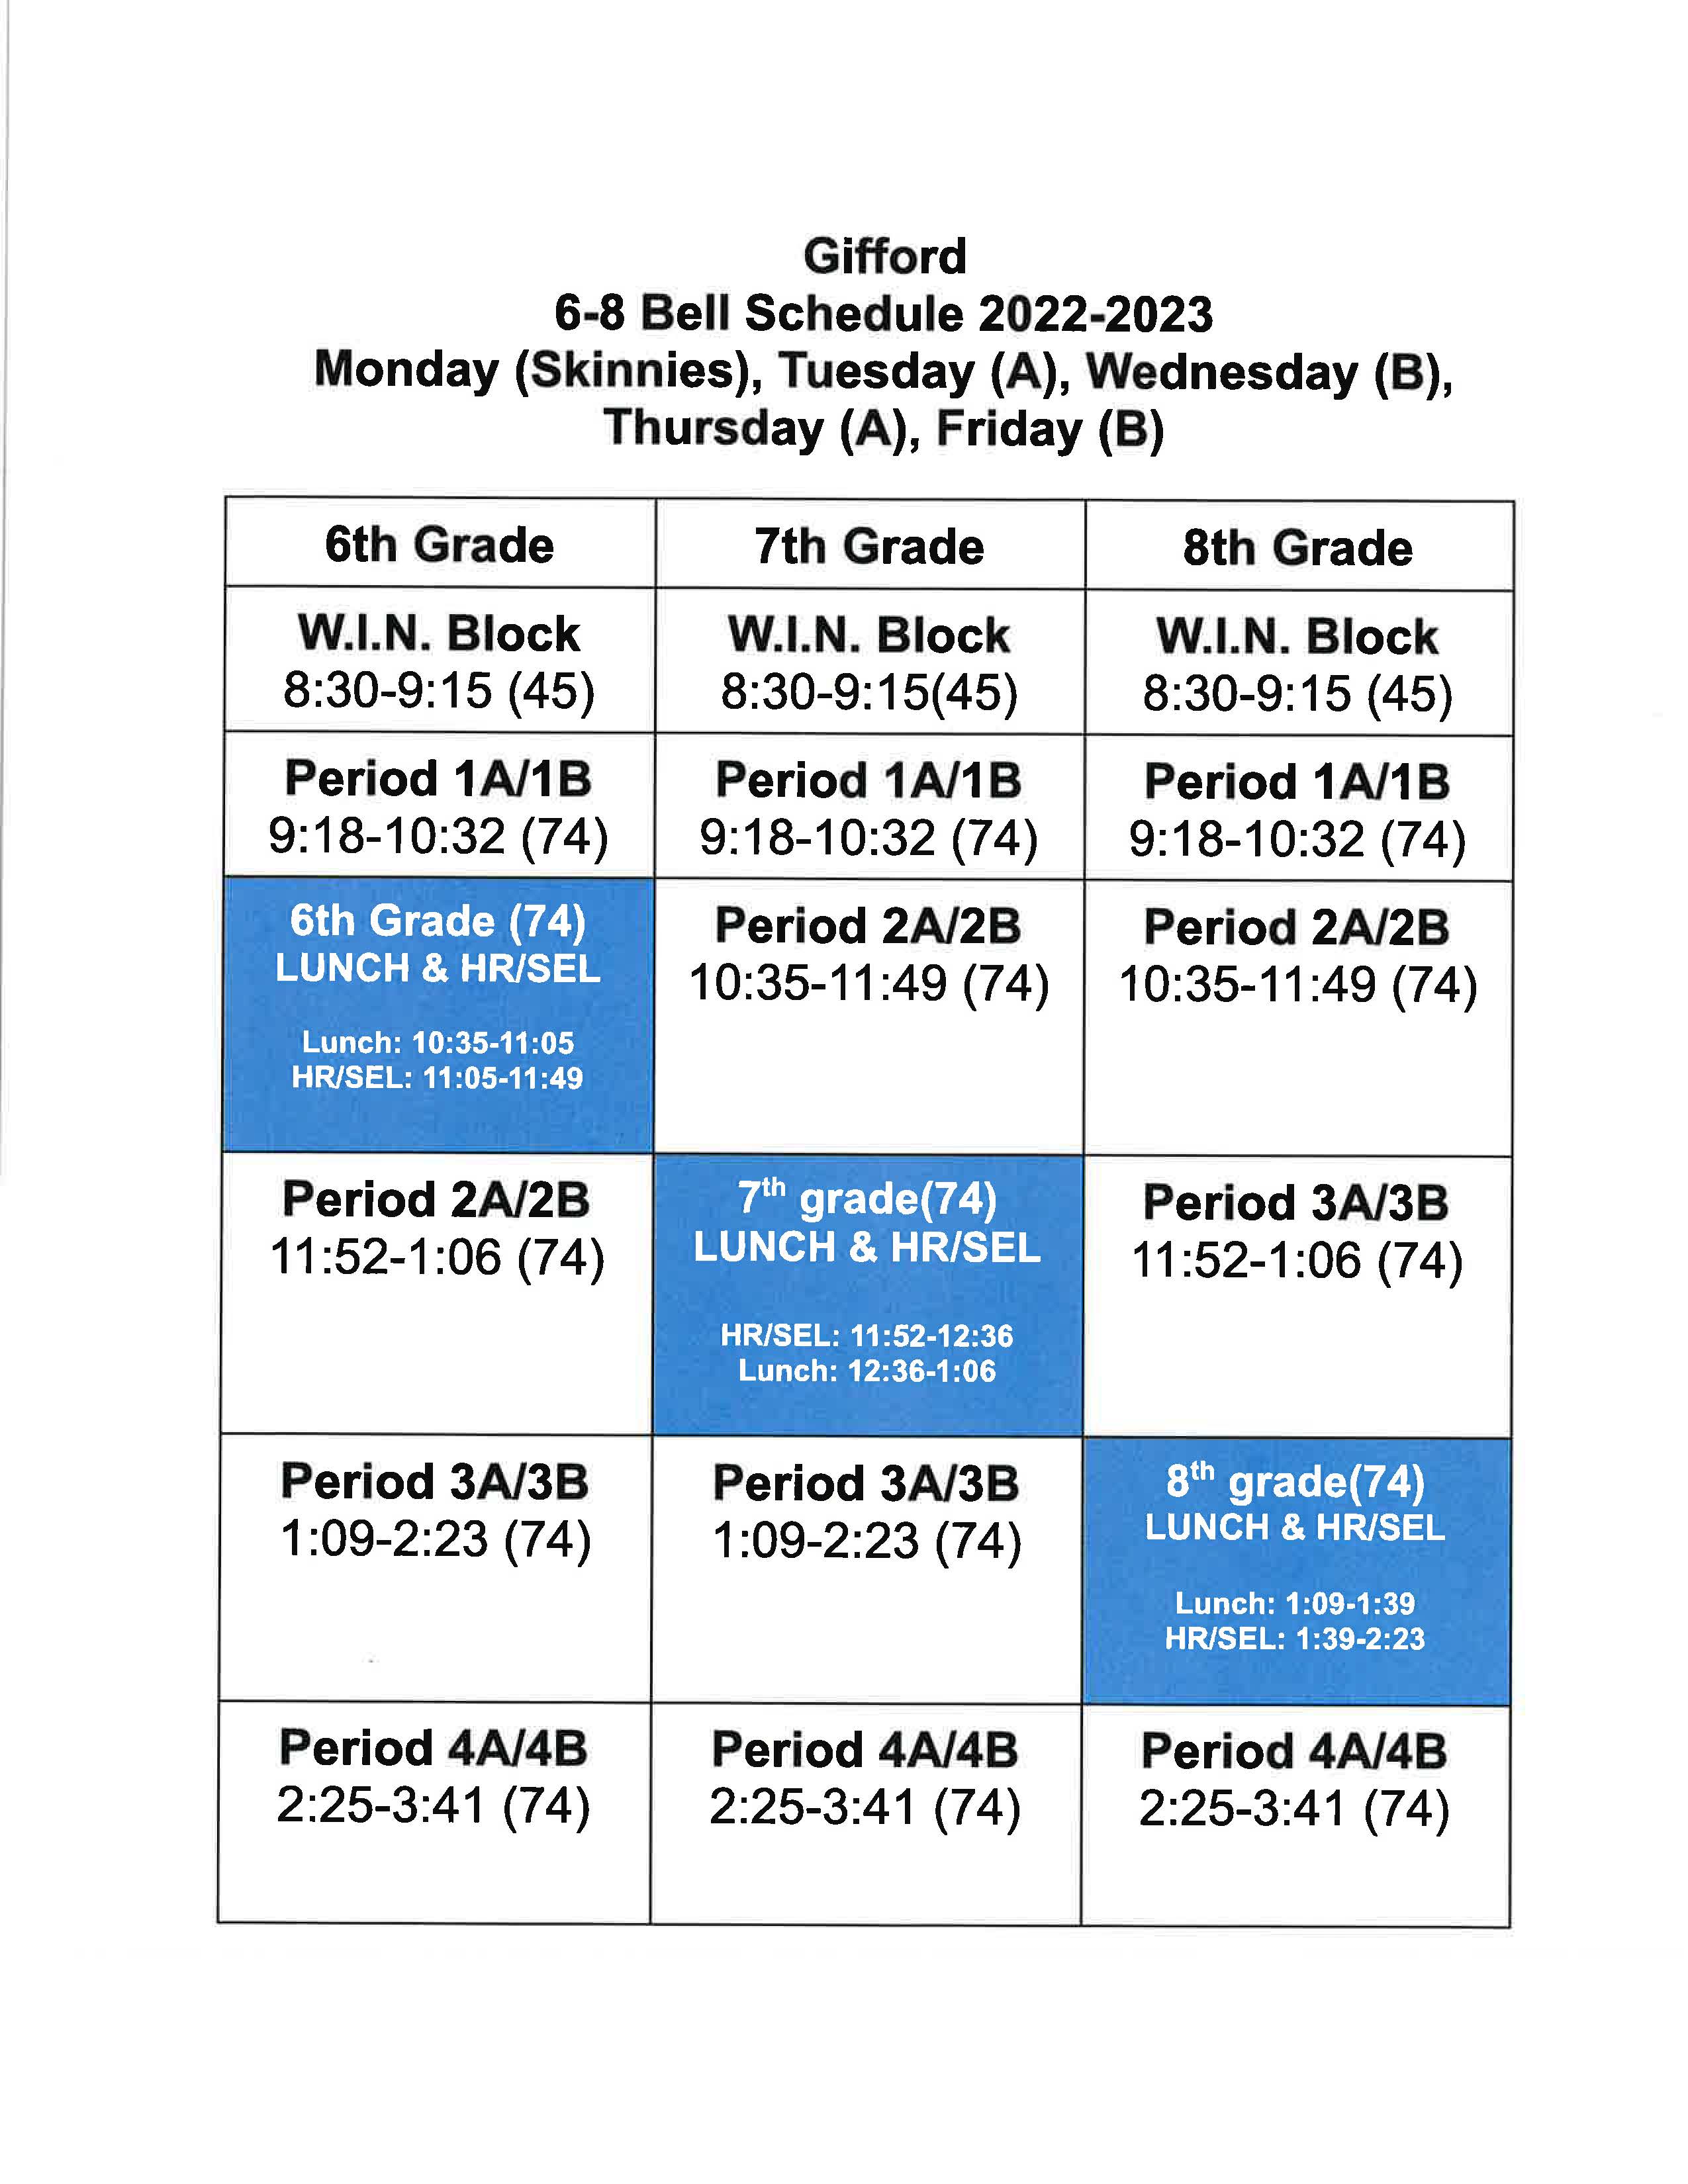 New Schedule For Middle School Students Beginning 9/12/22 RUSD